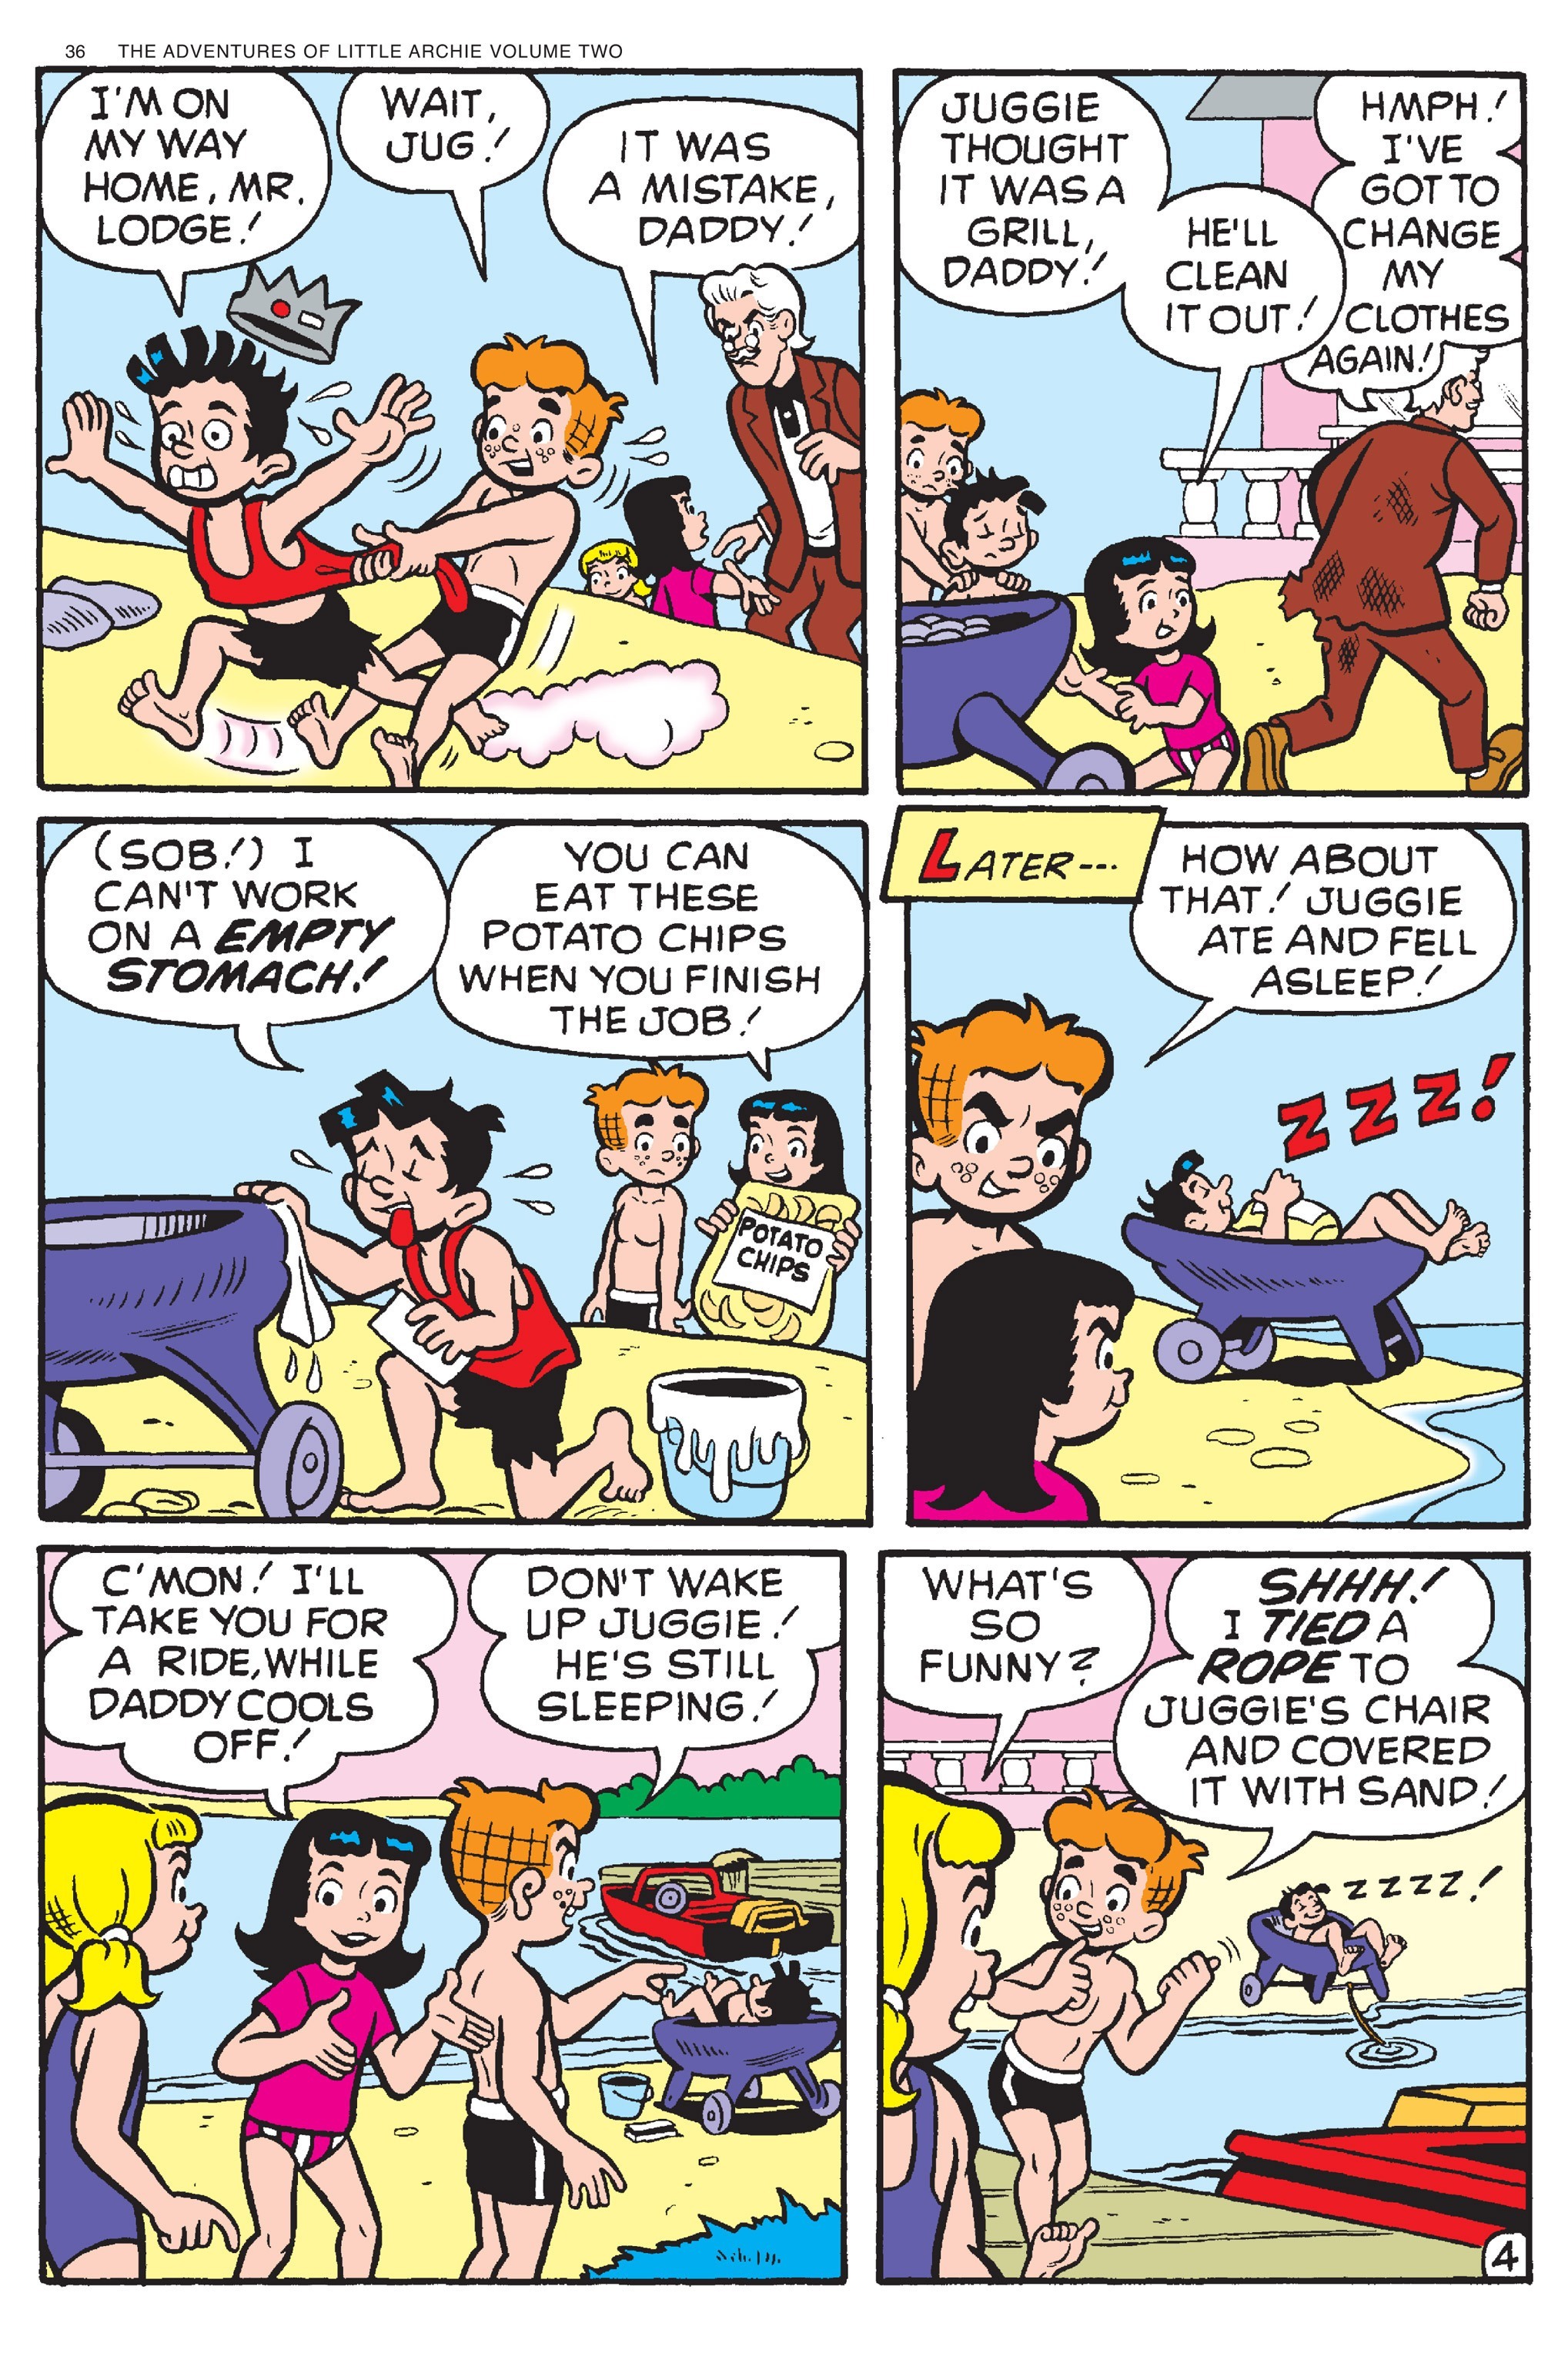 Read online Adventures of Little Archie comic -  Issue # TPB 2 - 37